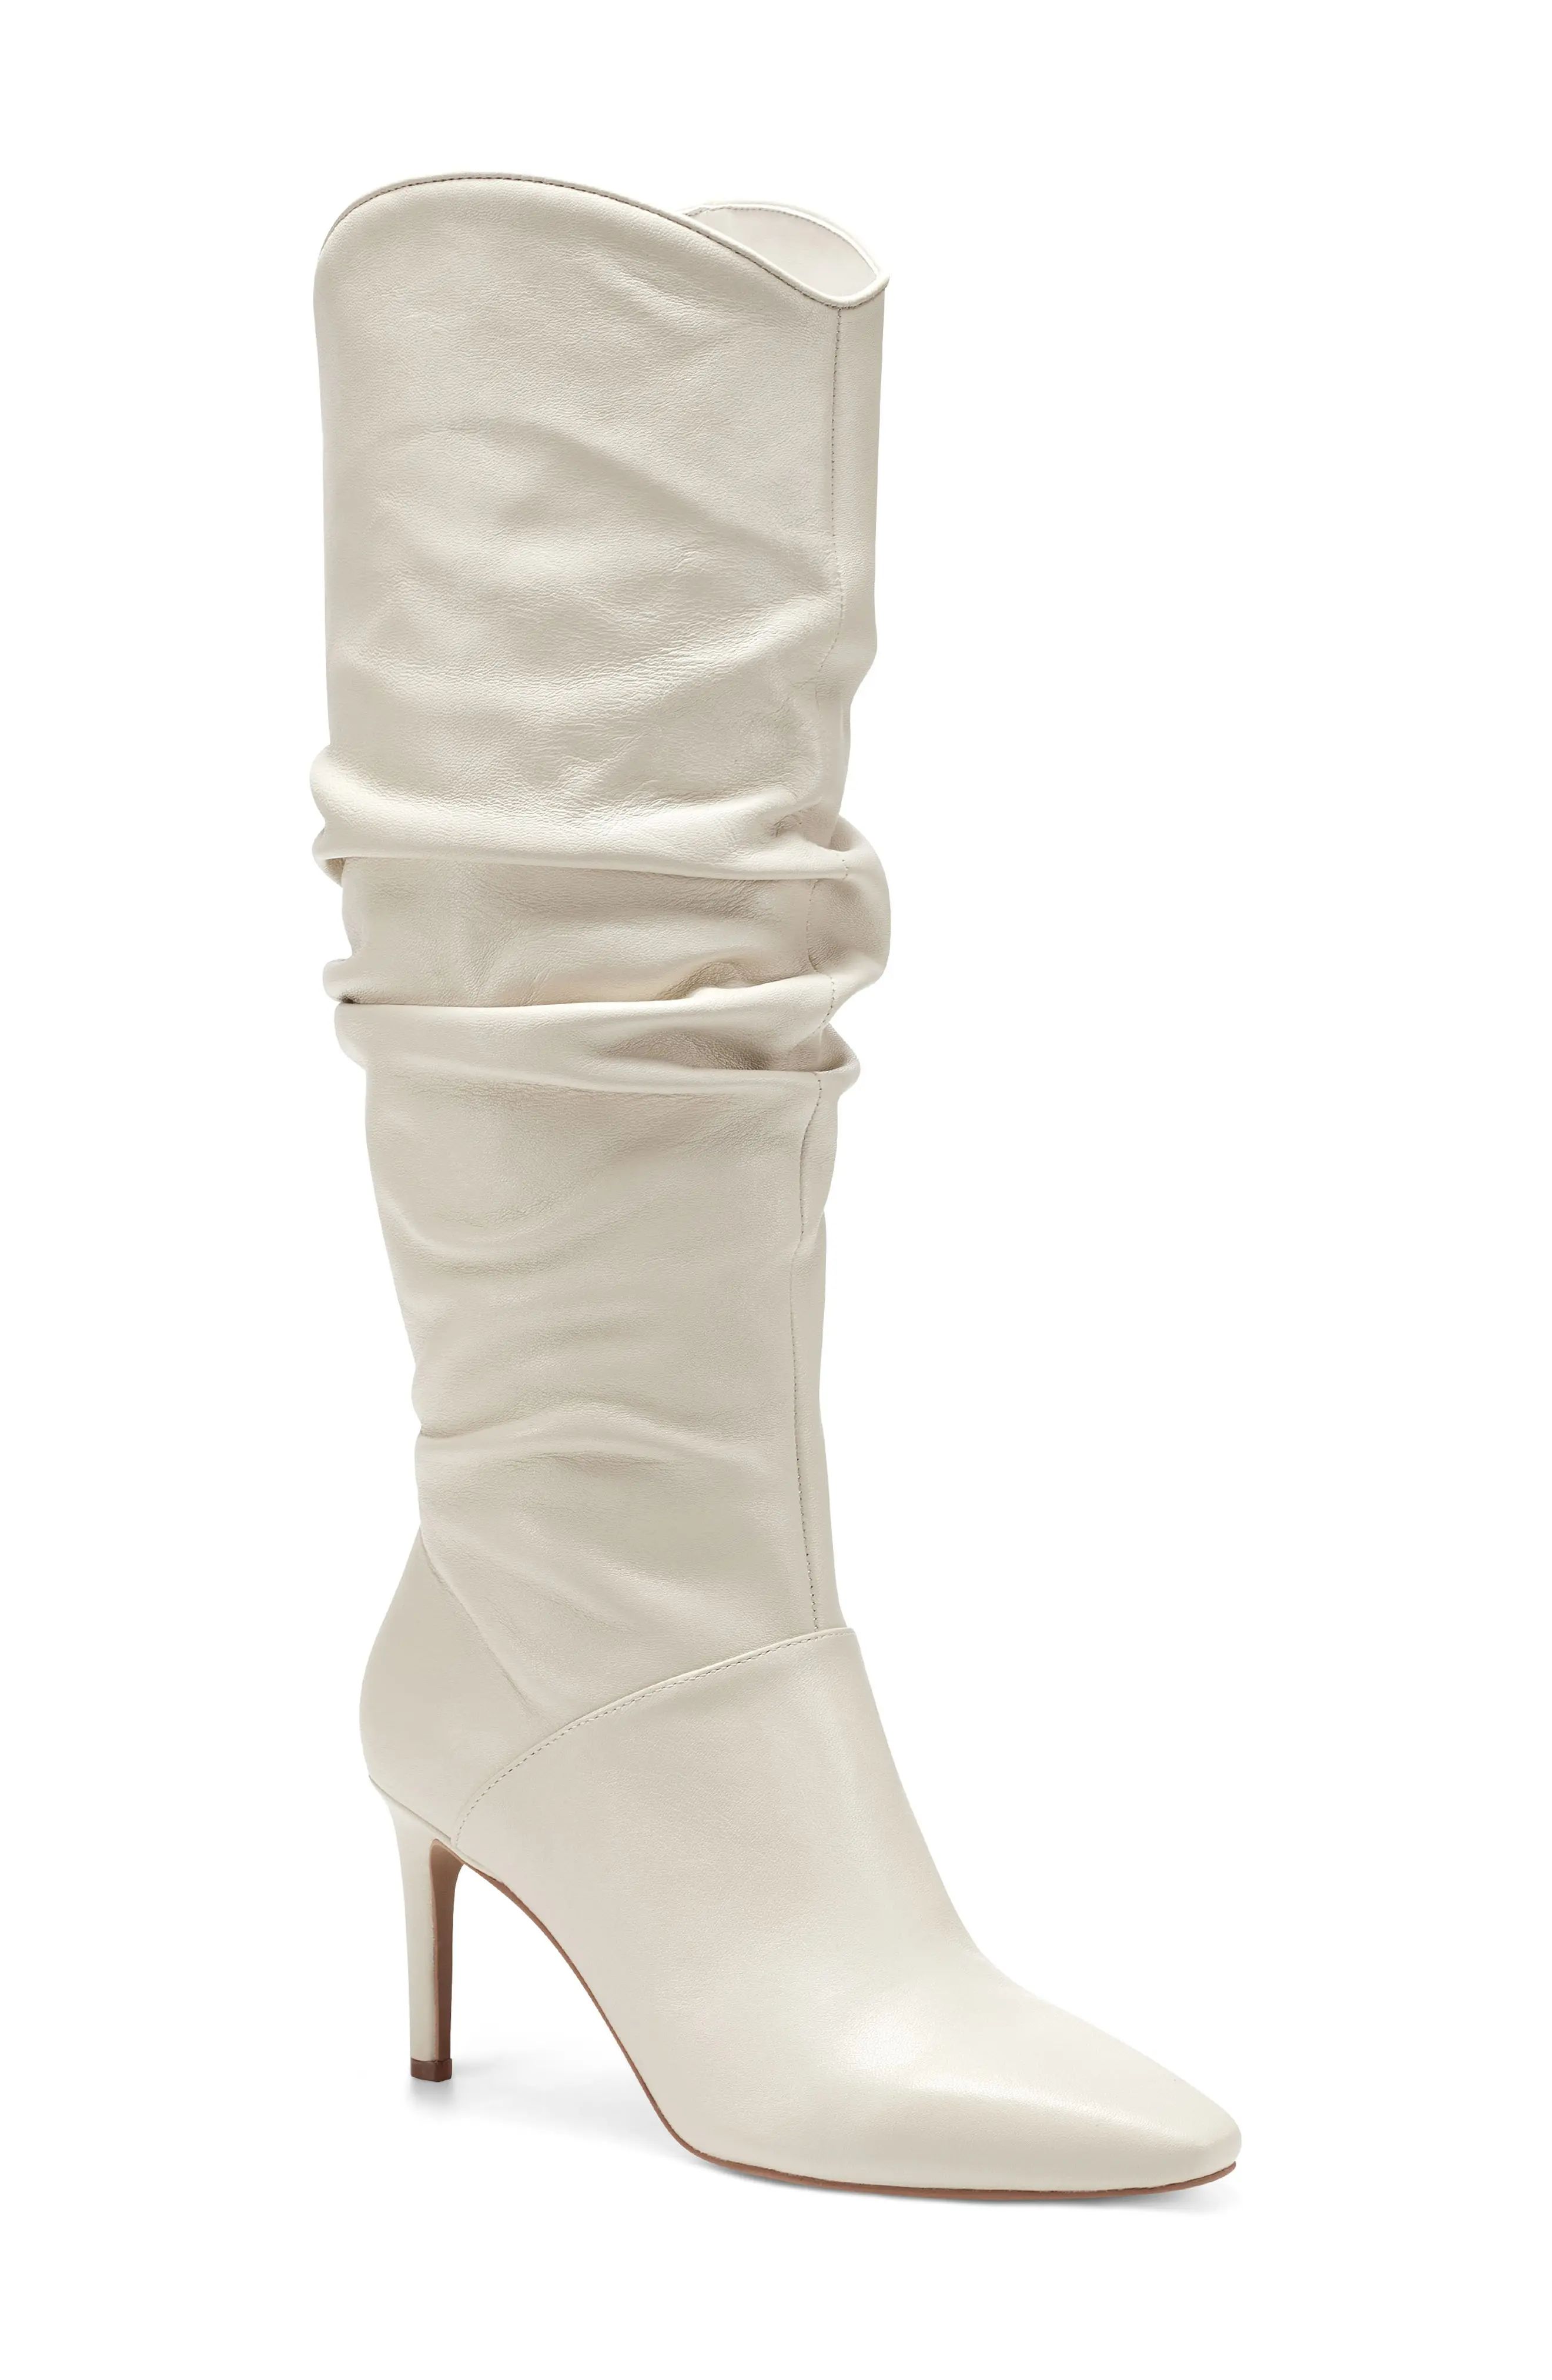 Vince Camuto Armonda Knee High Boot, Size 5 in White at Nordstrom | Nordstrom